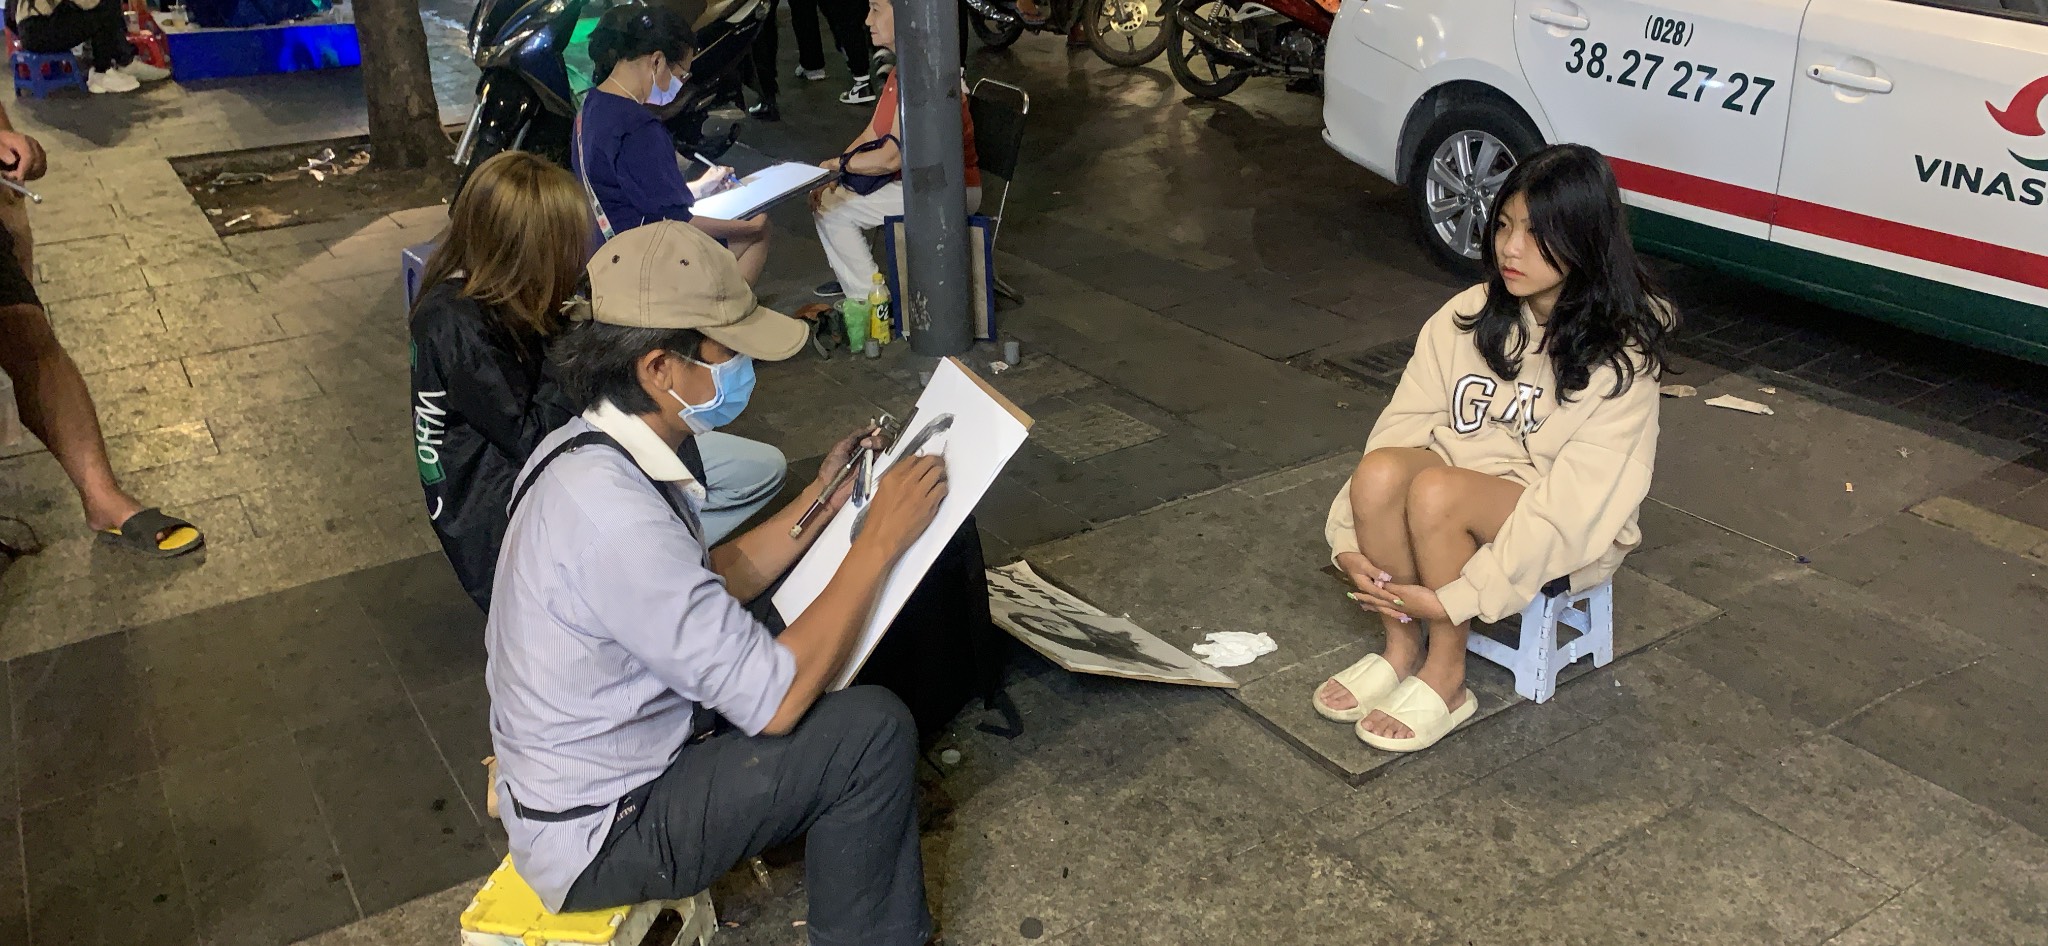 A street artist draws a portrait of a young woman on Nguyen Hue Walking Street in District 1, Ho Chi Minh City, January 31, 2022. Photo: T.T.D. / Tuoi Tre